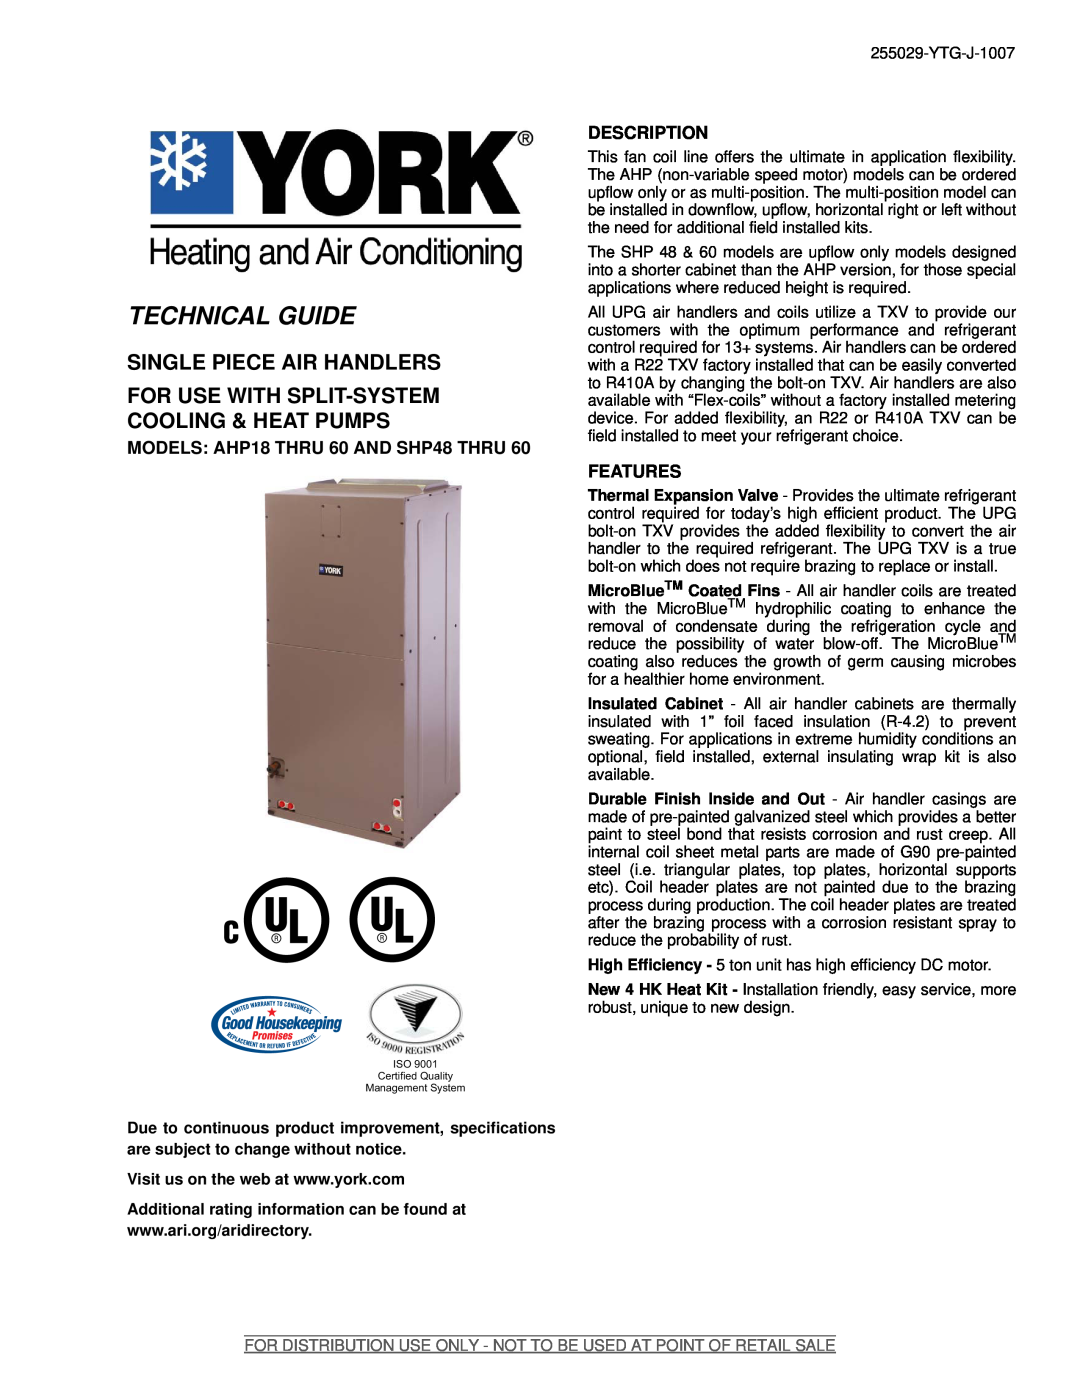 York SHP48 THRU 60 specifications MODELS AHP18 THRU 60 AND SHP48 THRU, Description, Features, Technical Guide 